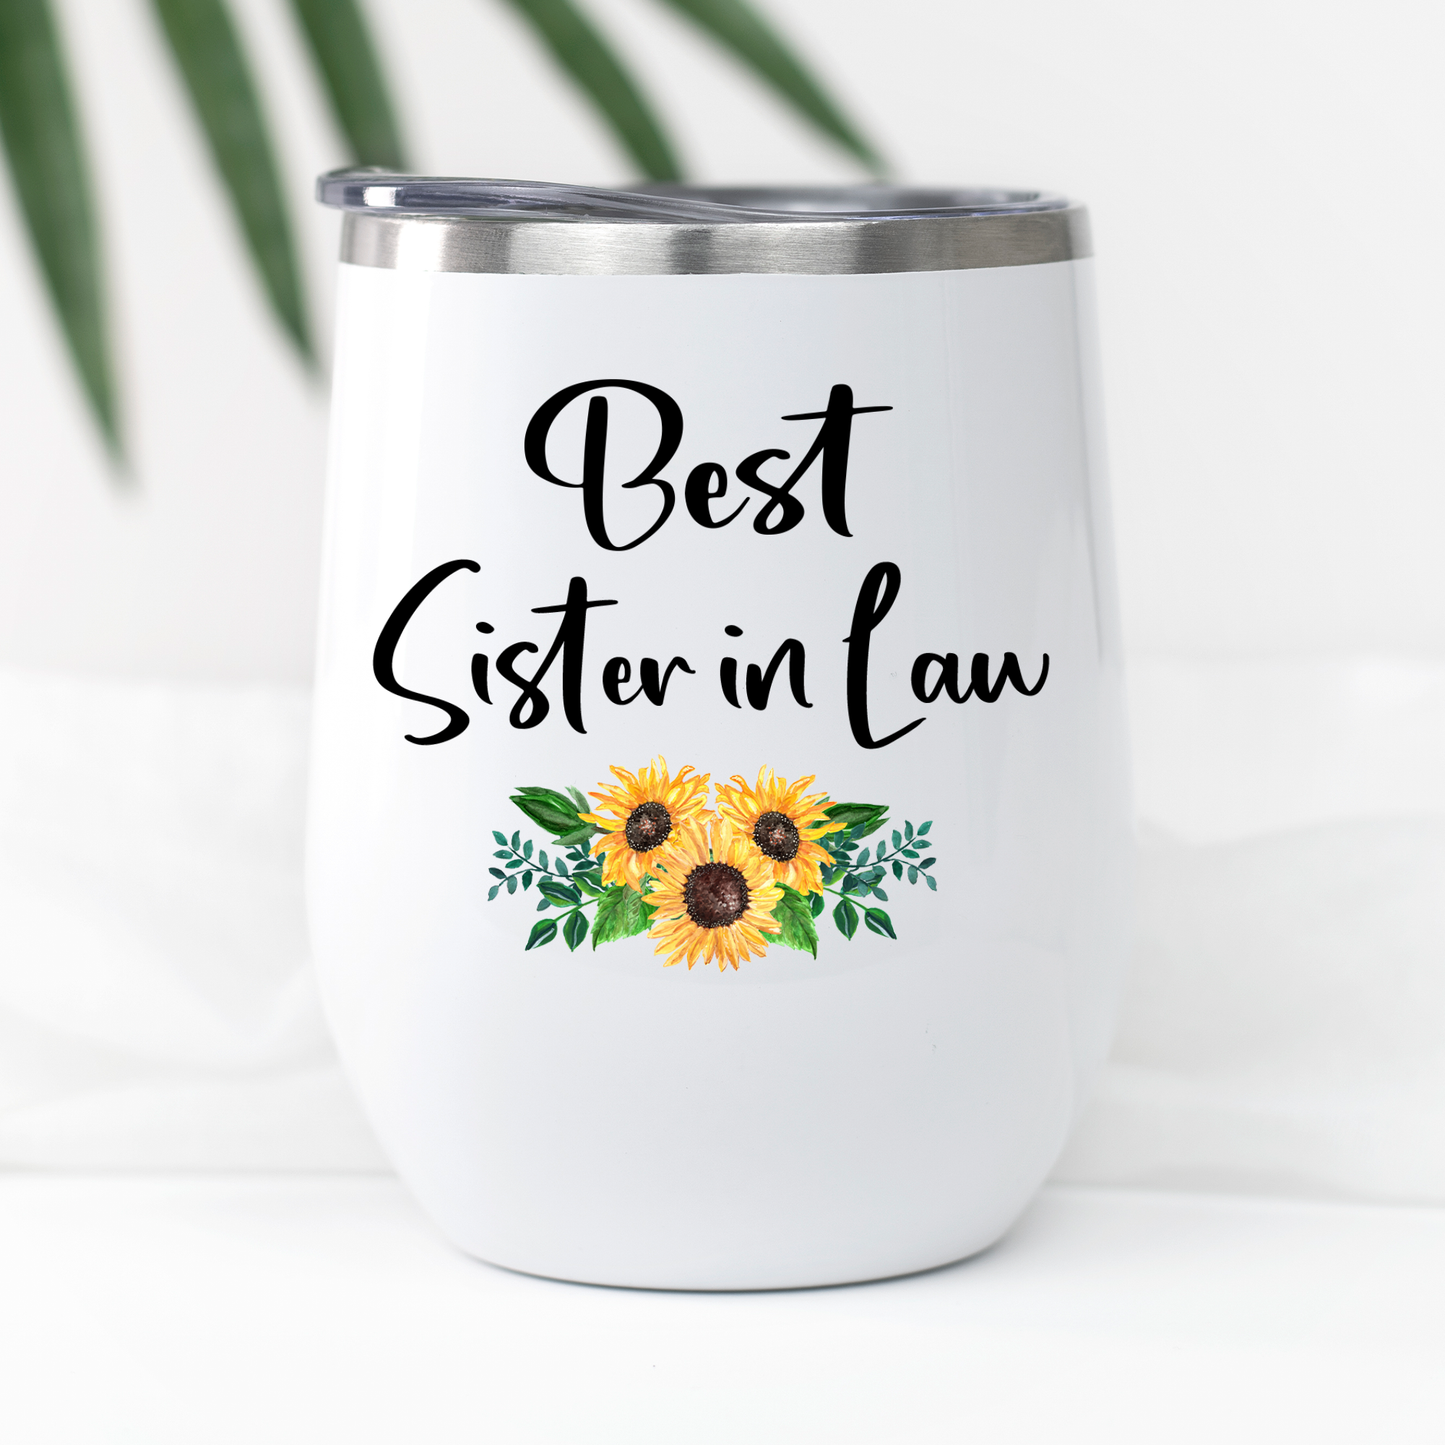 Best Sister-in-Law Wine Tumbler, Personalized Sister in Law Birthday, Christmas Gift, Sister Floral Cup, Sis in Law Wedding Gift from Bride